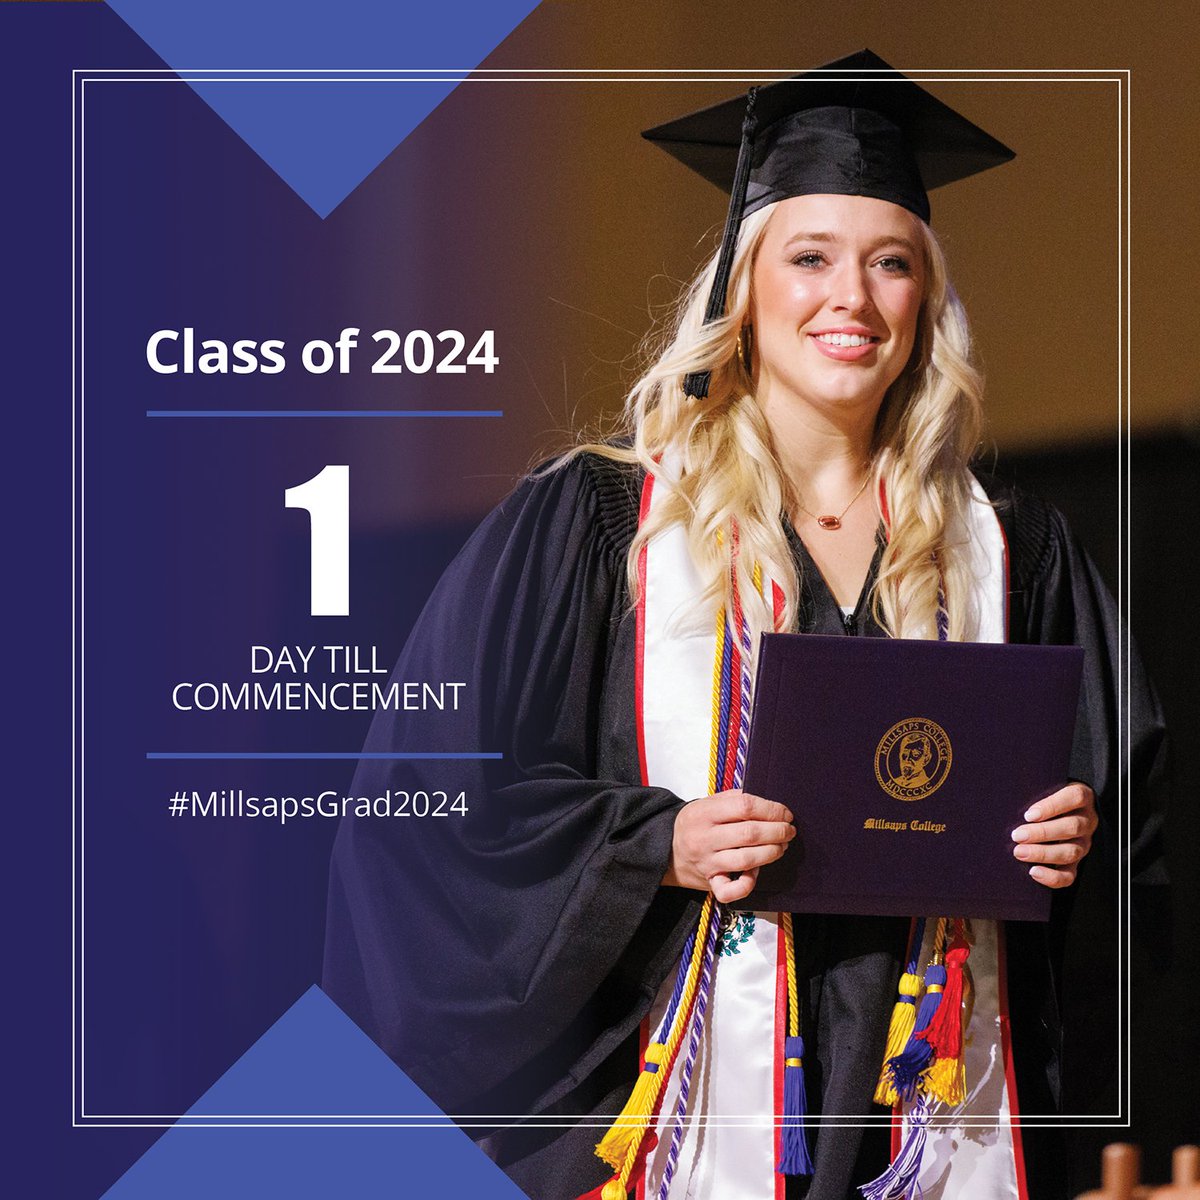 Commencement is only a day away. Let's do this! #MillsapsGrad2024 #Classof2024 #GoMajors